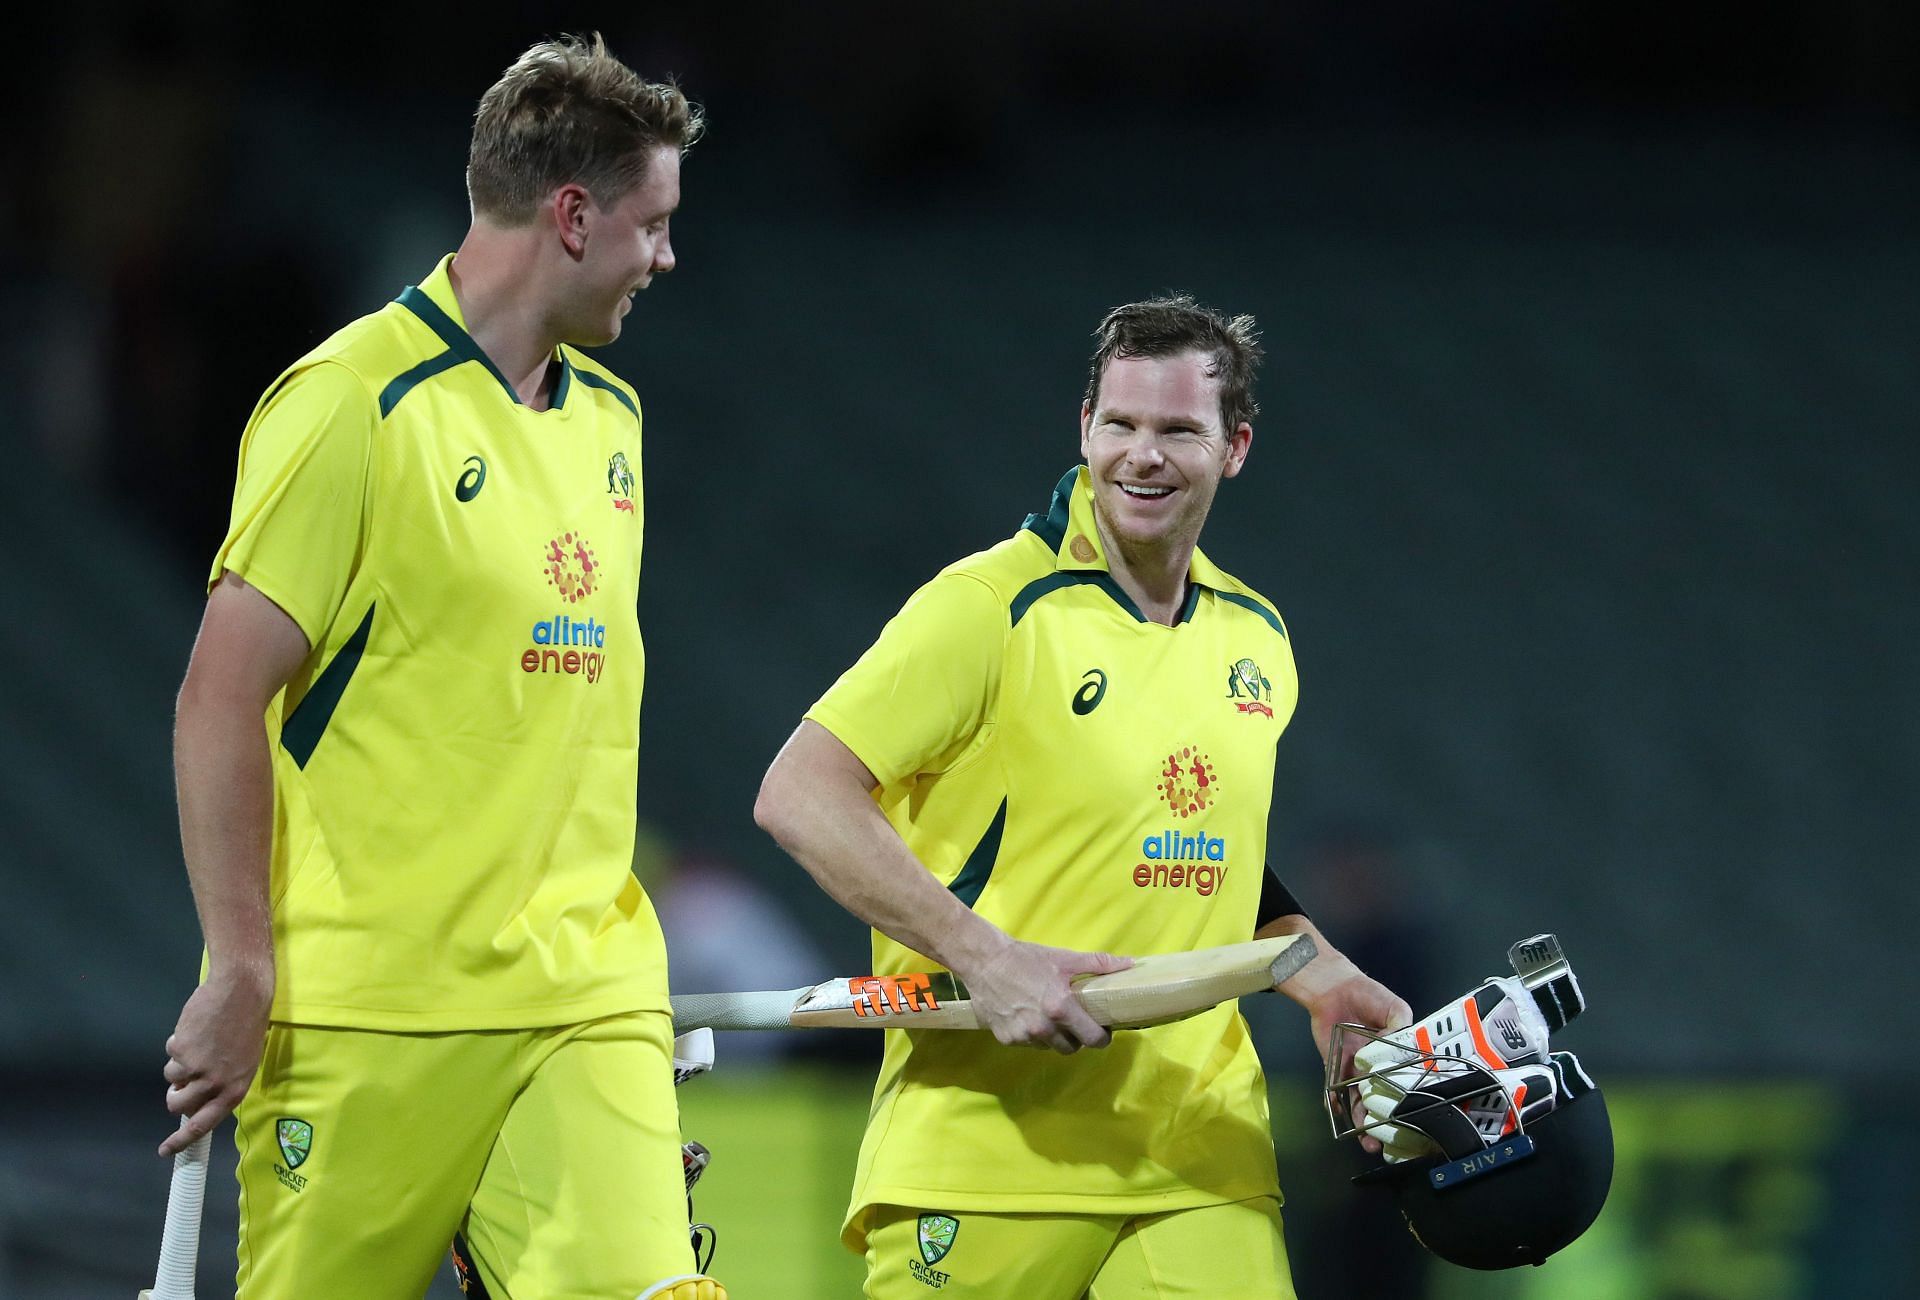 3 Australian players who could pose a threat to India in the ODI series